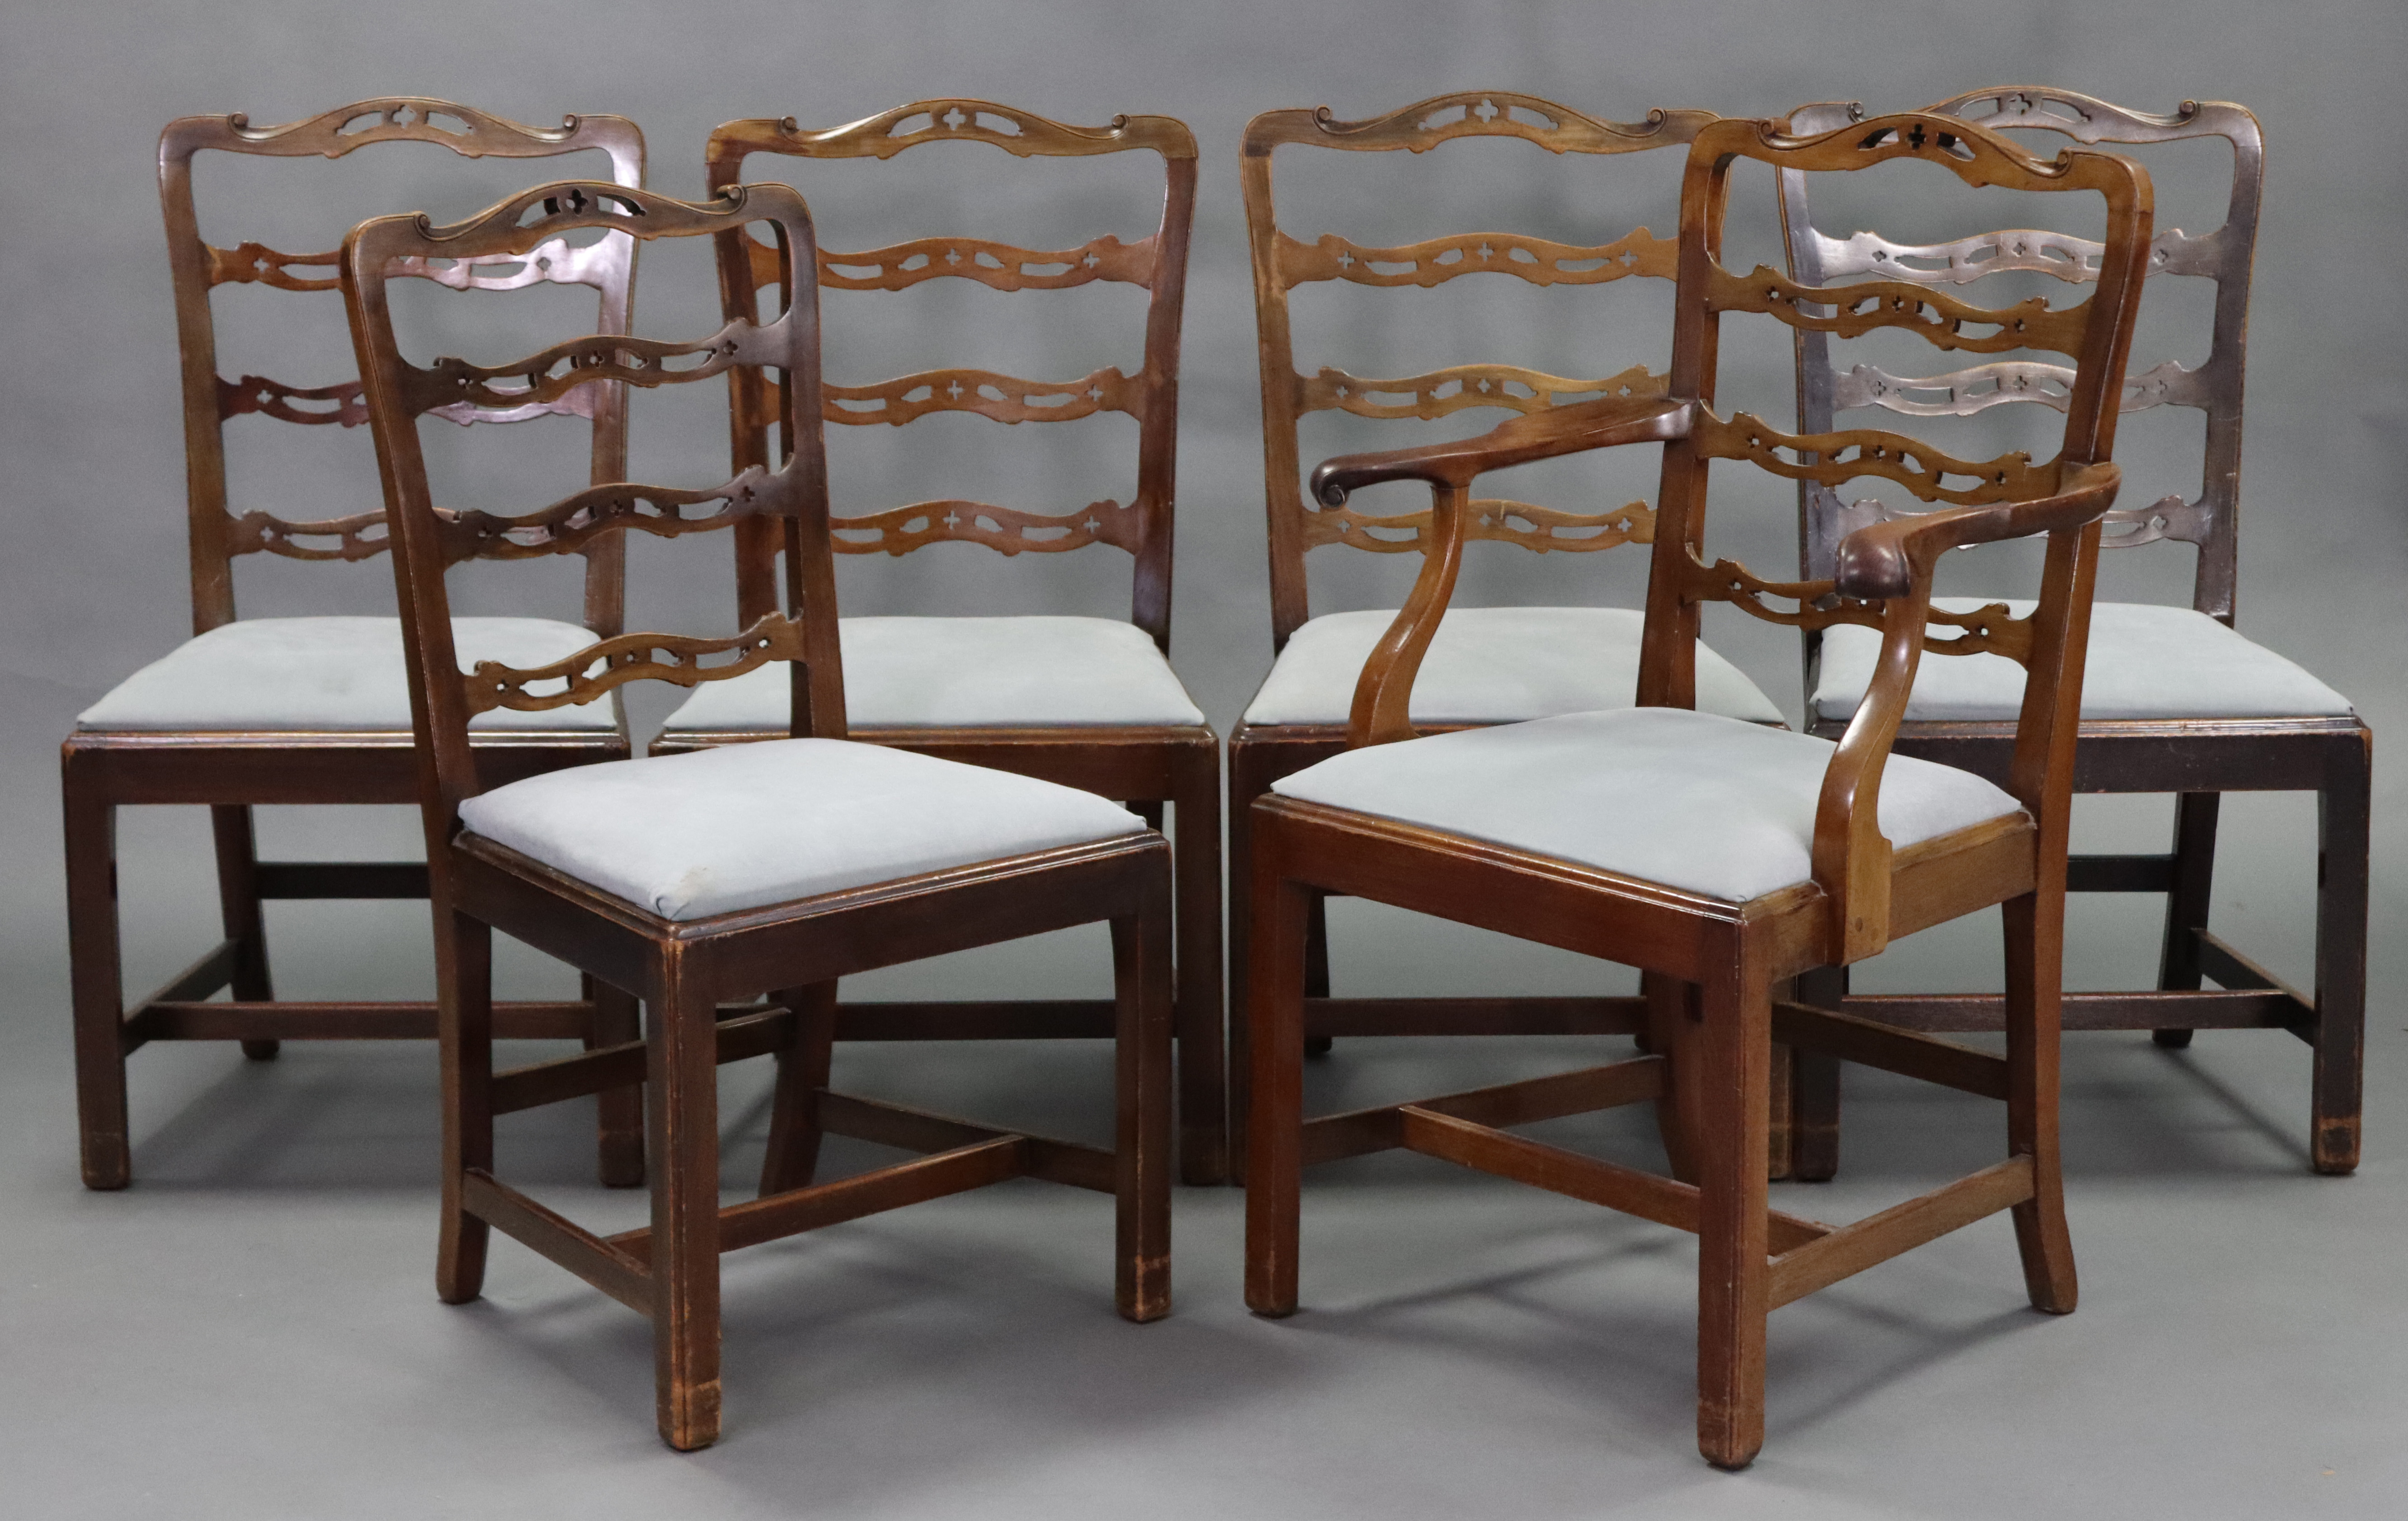 A set of six 18th century-style mahogany dining chairs, including an elbow chair, each with